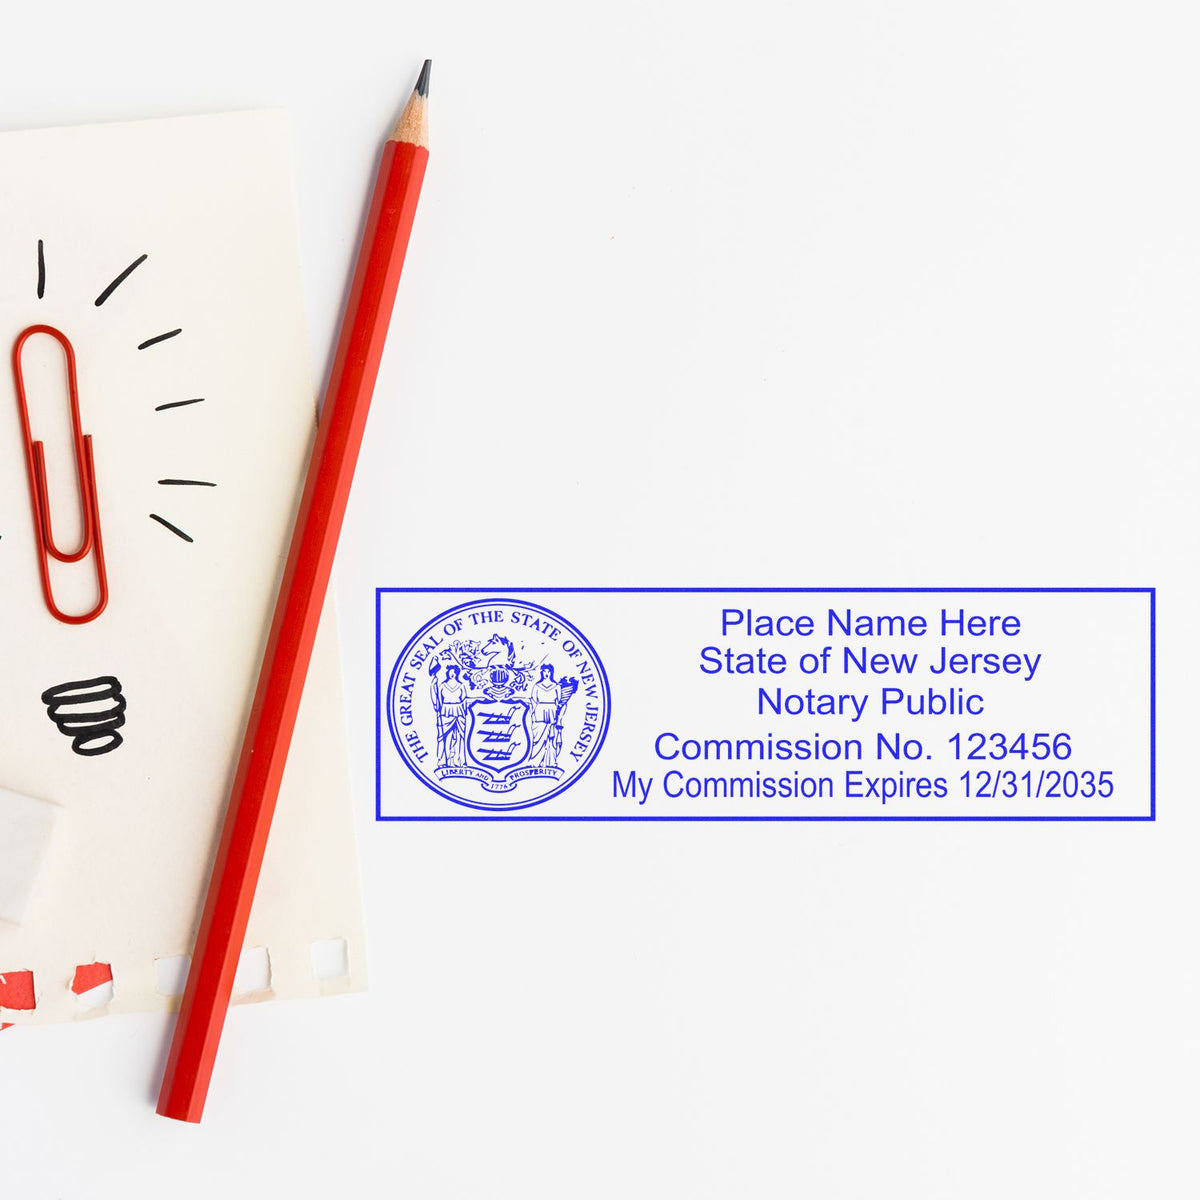 The MaxLight Premium Pre-Inked New Jersey State Seal Notarial Stamp stamp impression comes to life with a crisp, detailed photo on paper - showcasing true professional quality.